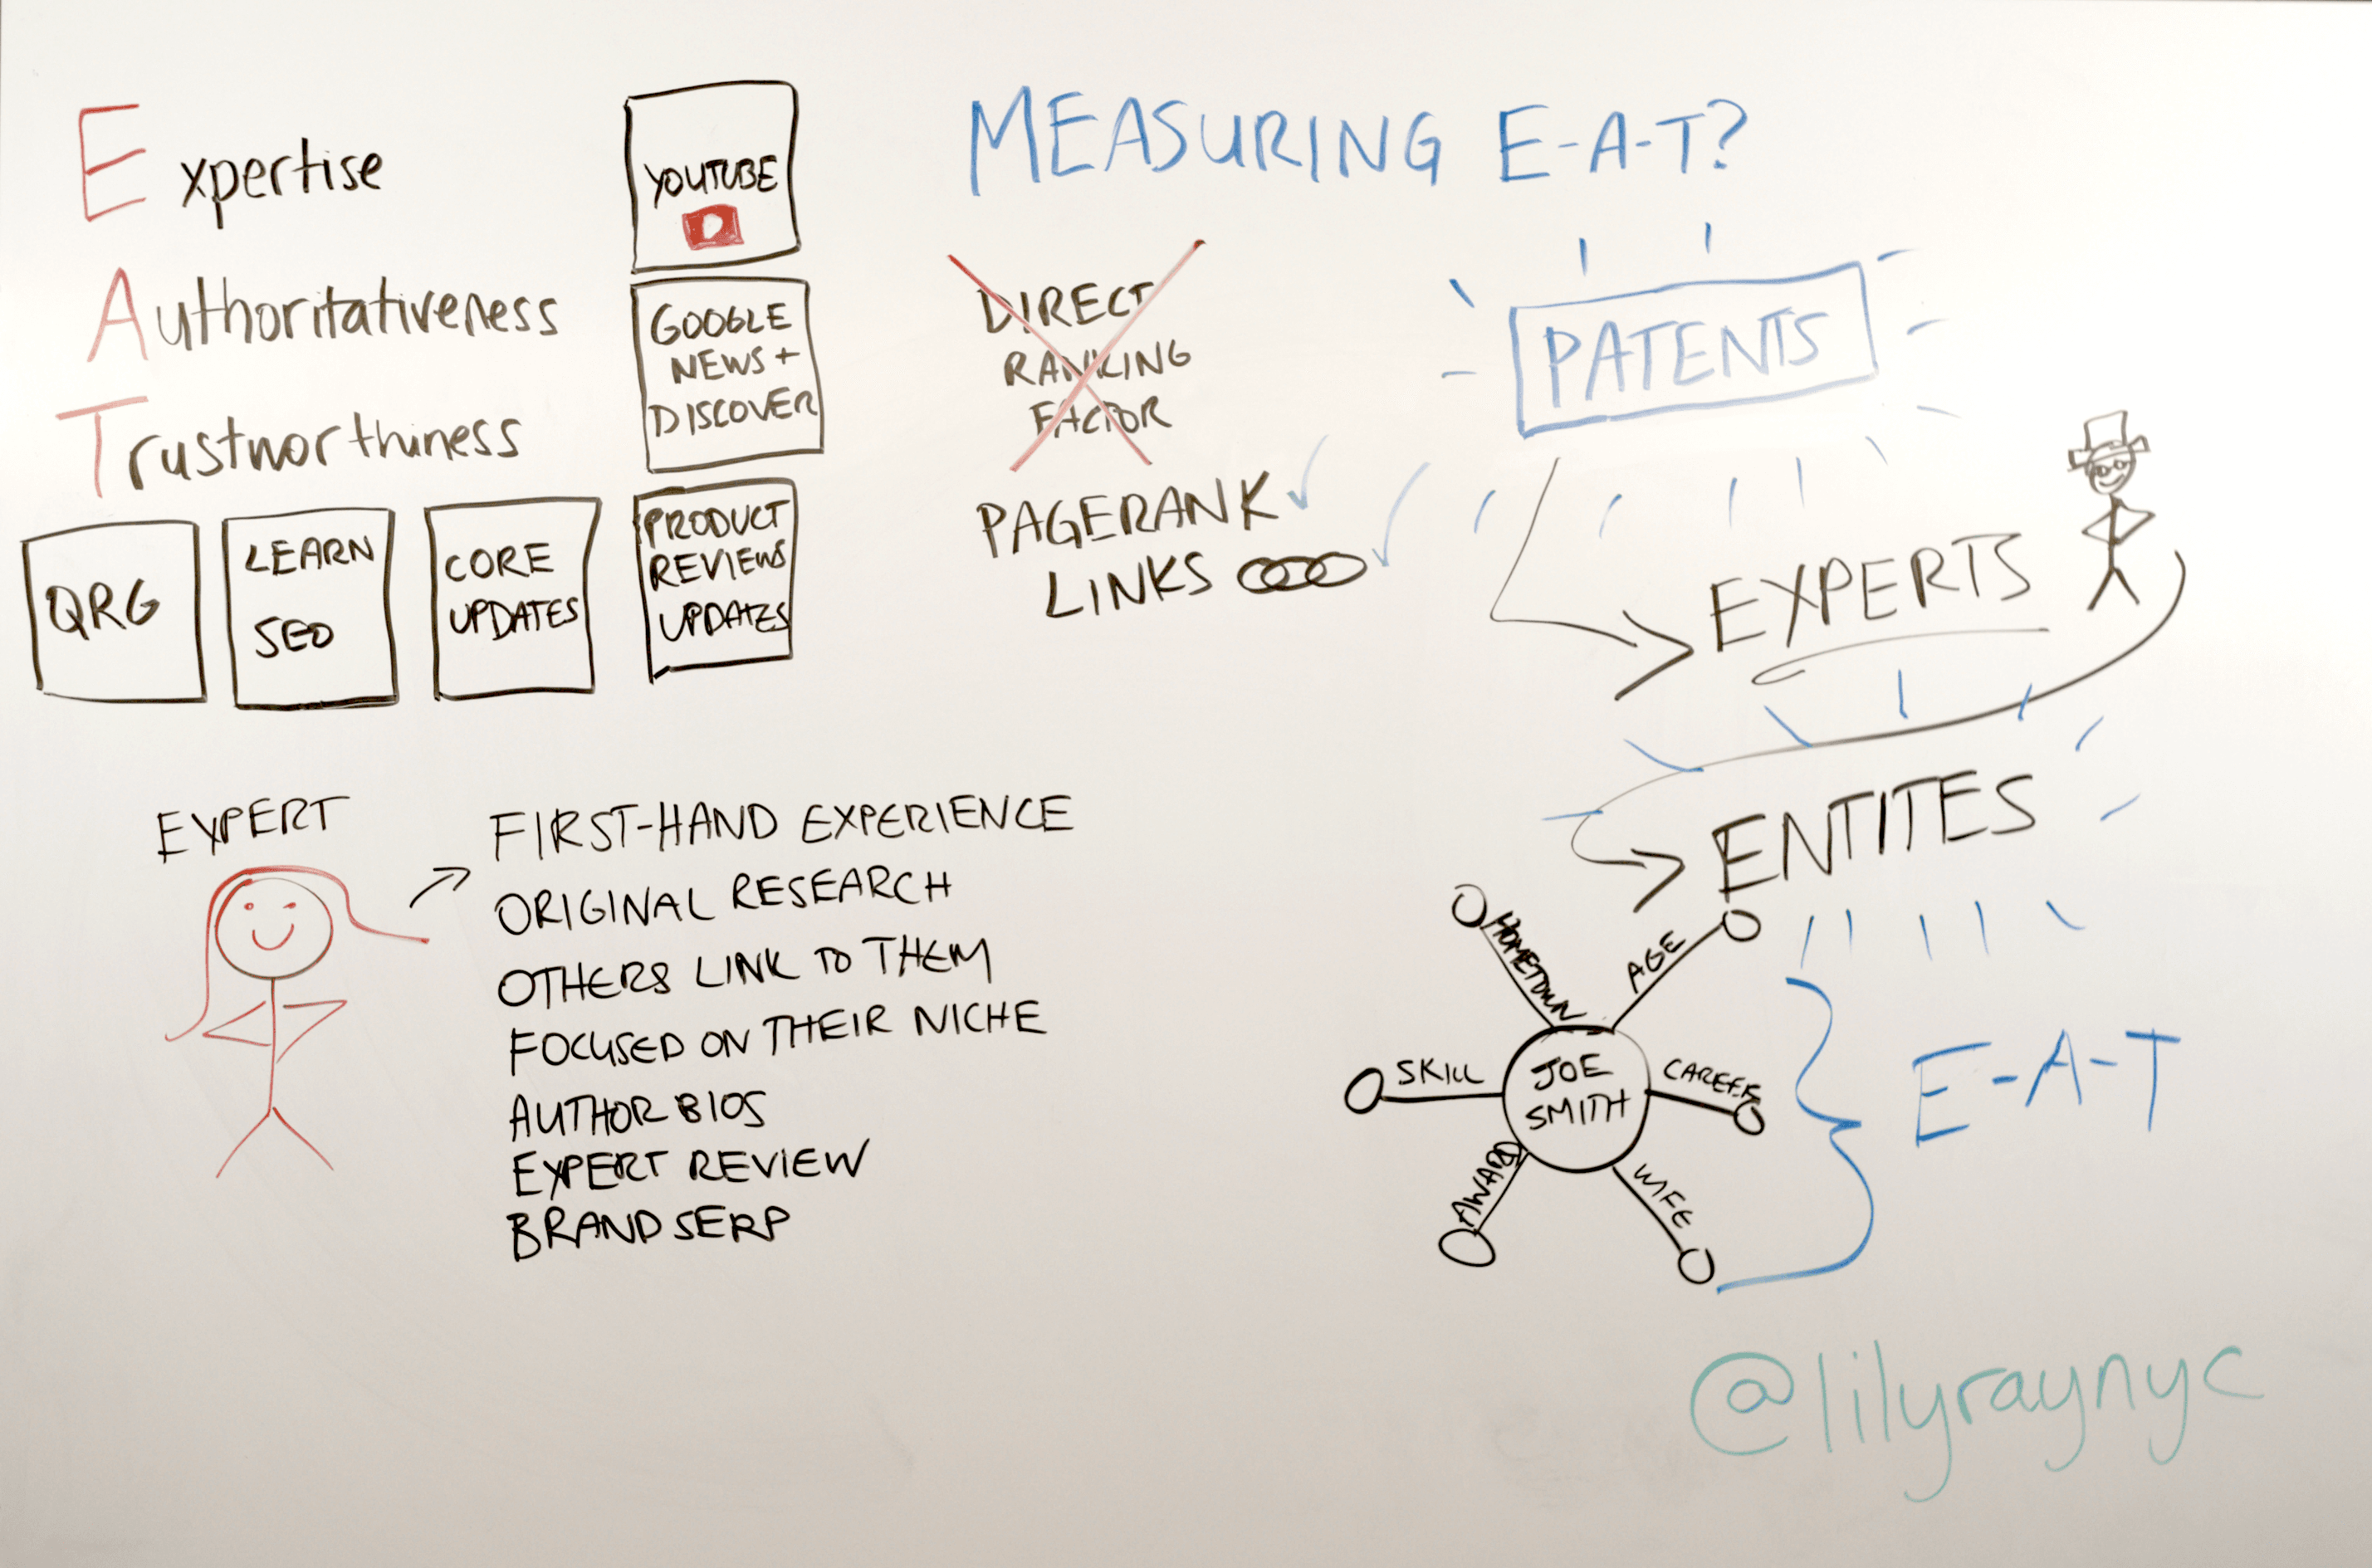 whiteboard outlining tips for building and measuring expertise